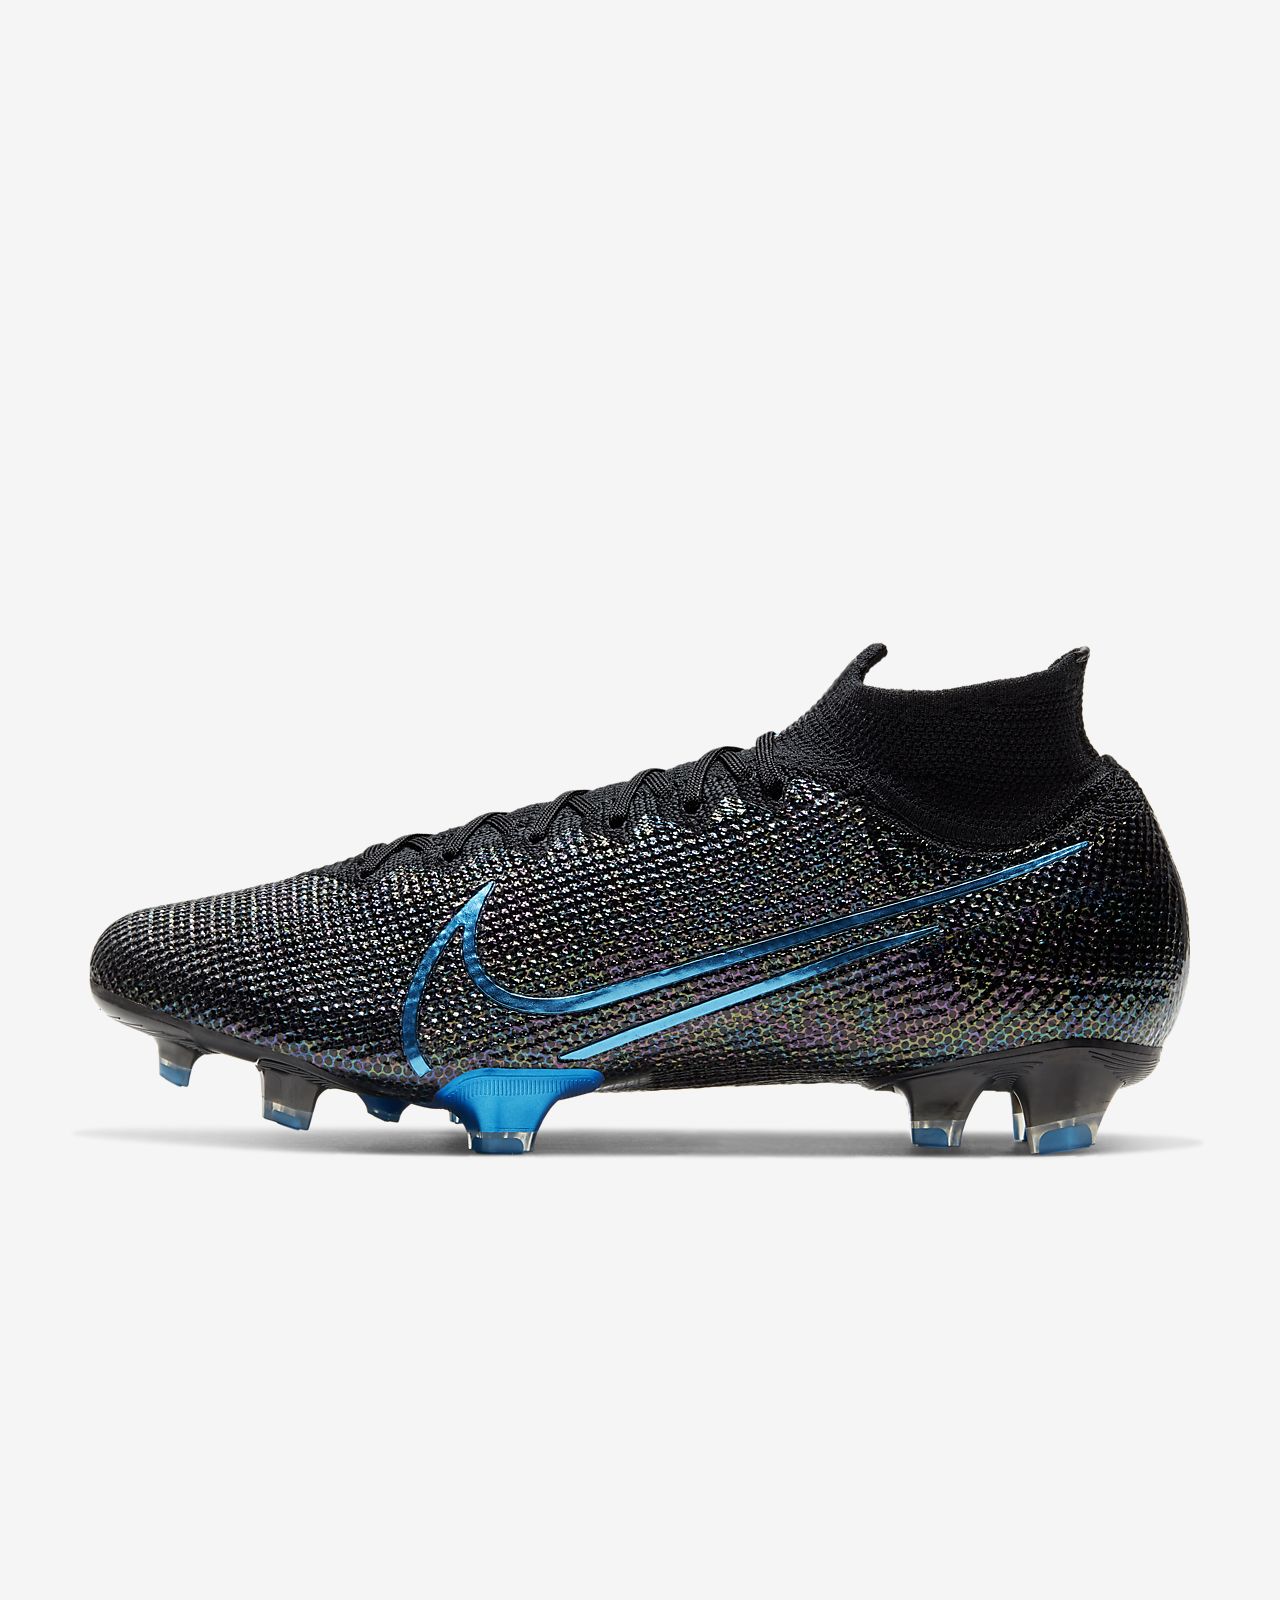 Nike Mercurial Superfly 7 Vapor 13 Play Test and. YouTube